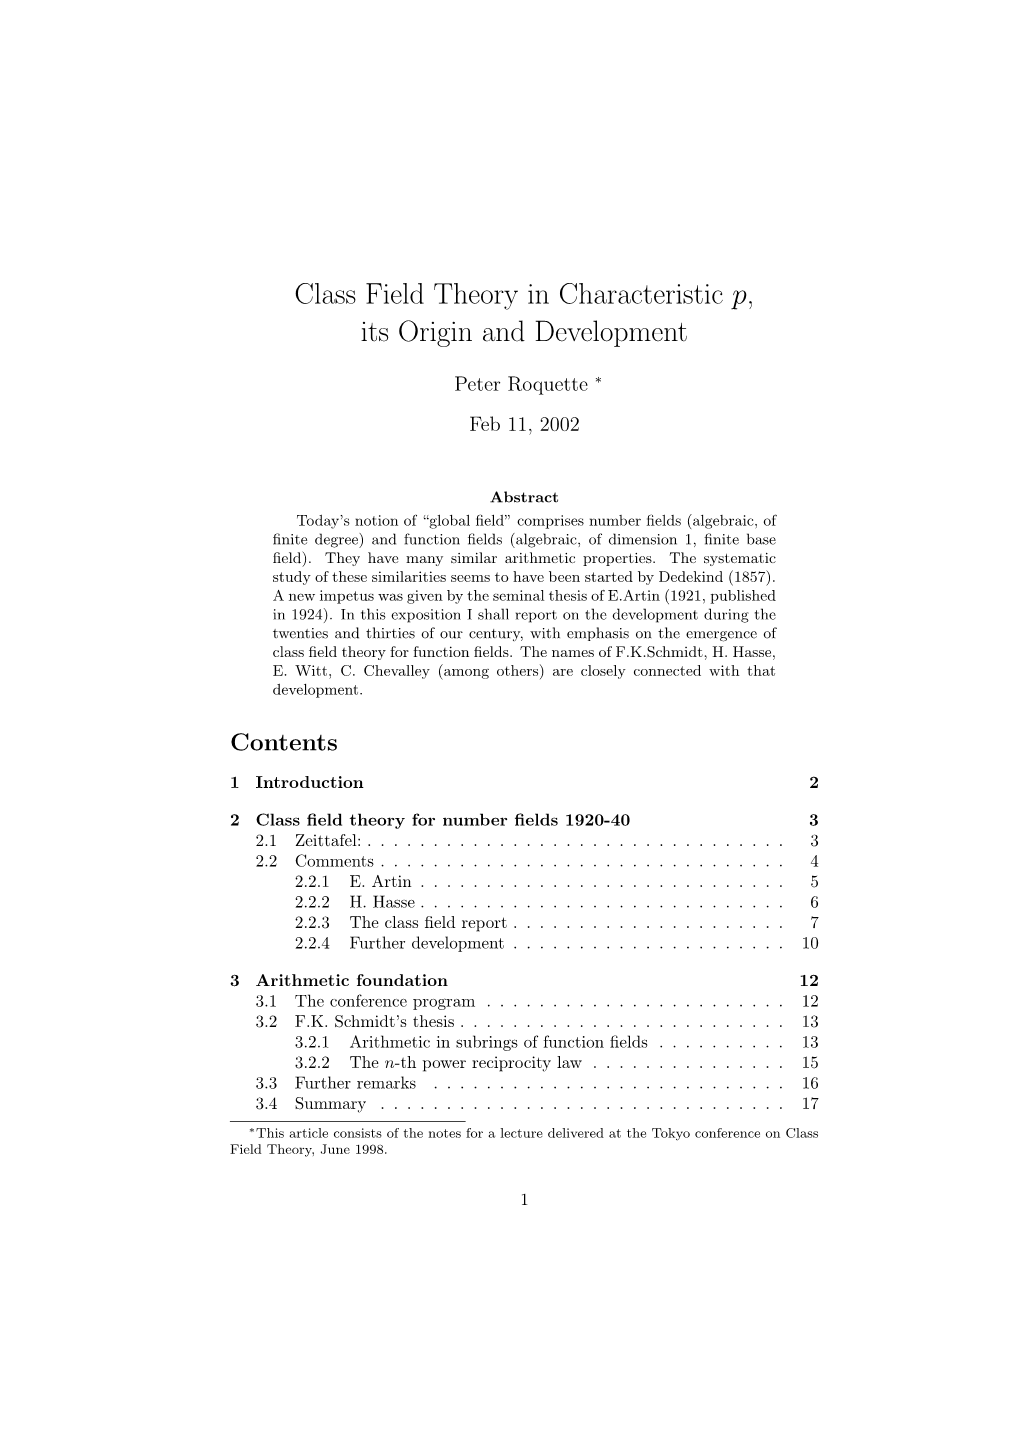 Class Field Theory in Characteristic P, Its Origin and Development